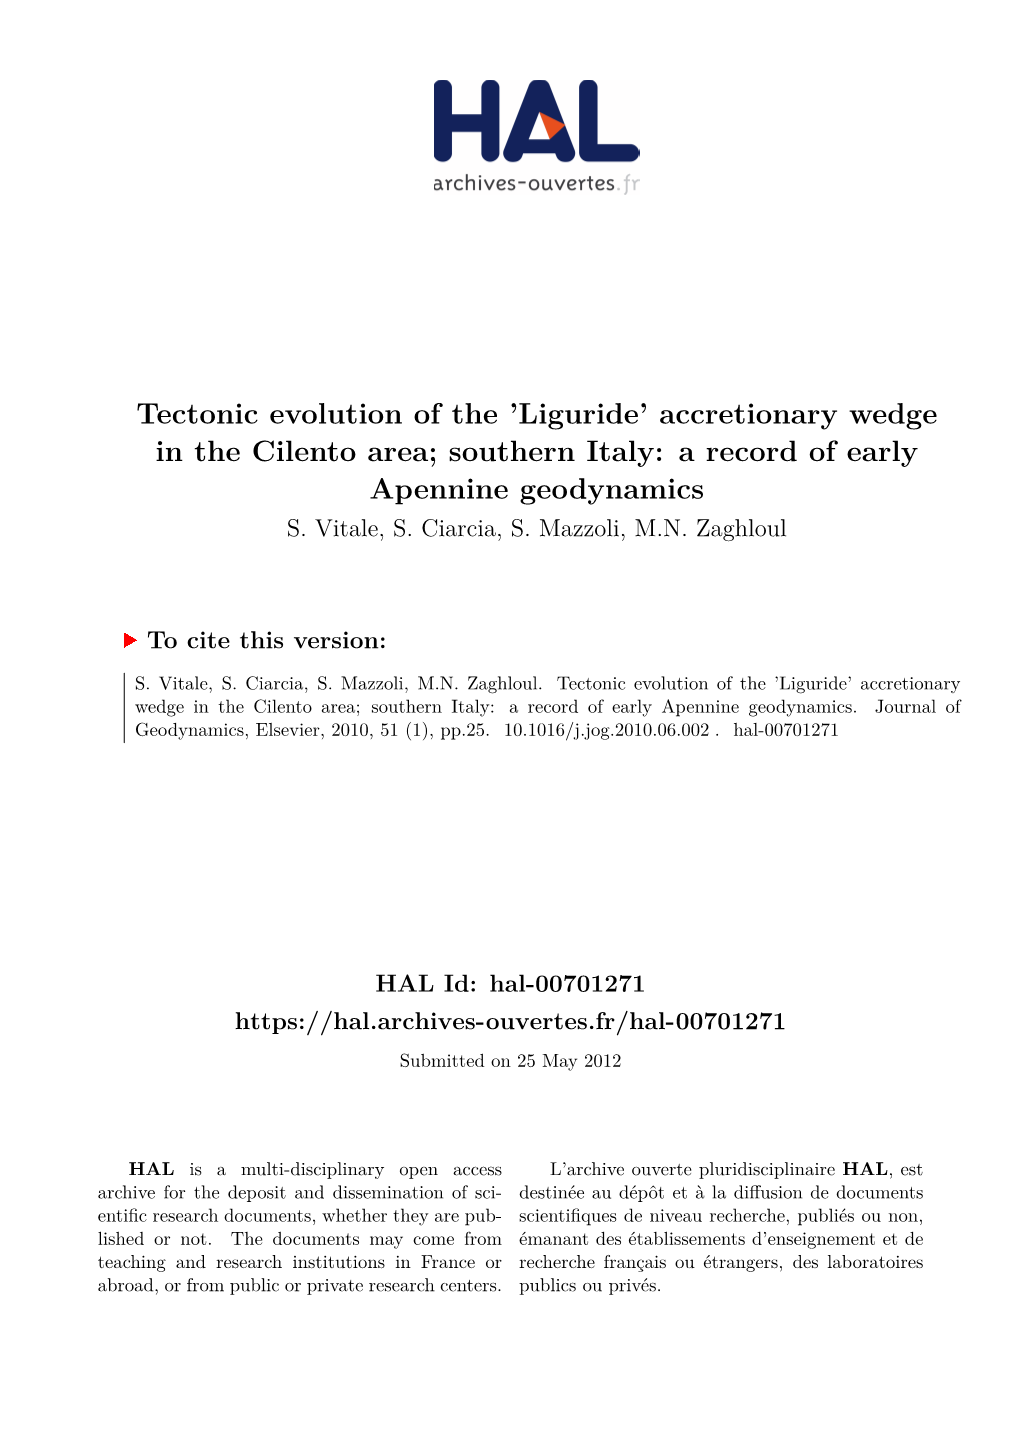 Tectonic Evolution of the ’Liguride’ Accretionary Wedge in the Cilento Area; Southern Italy: a Record of Early Apennine Geodynamics S